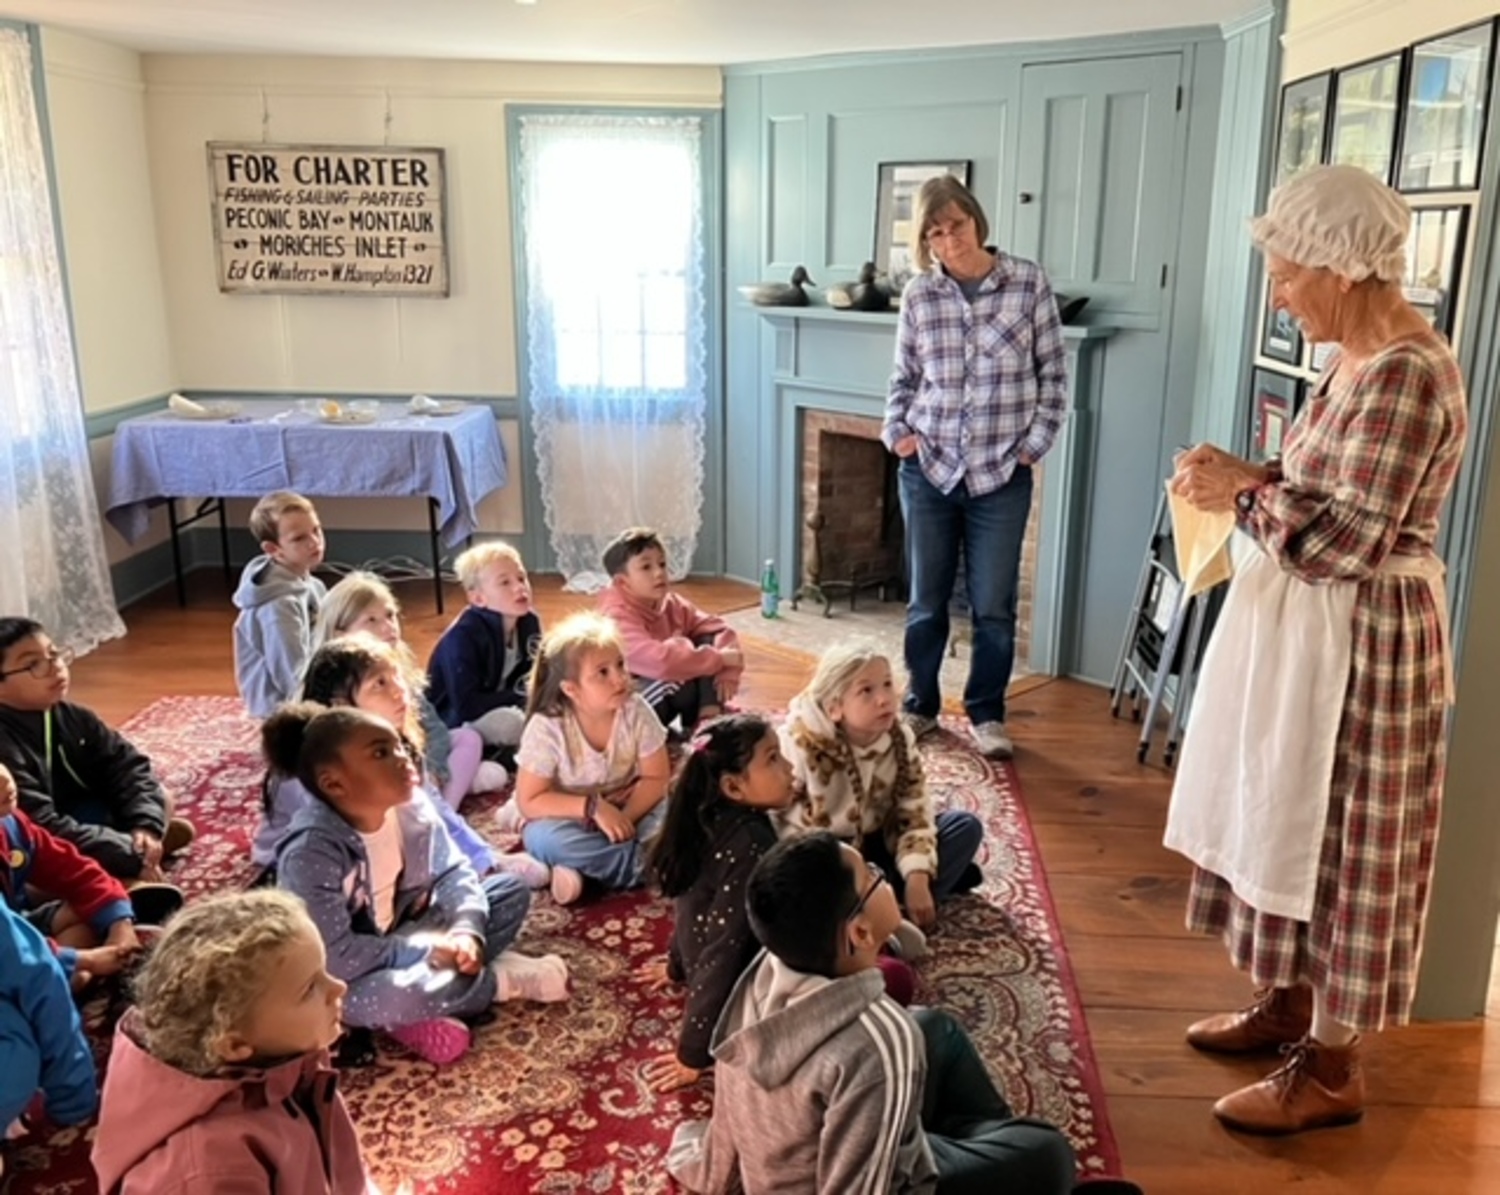 Greater Westhampton Museum Society member Dot Berdinka leads a lesson about Colonial artifacts to second graders at Westhampton Beach Elementary School. COURTESY GREATER WESTHAMPTON MUSEUM SOCIETY